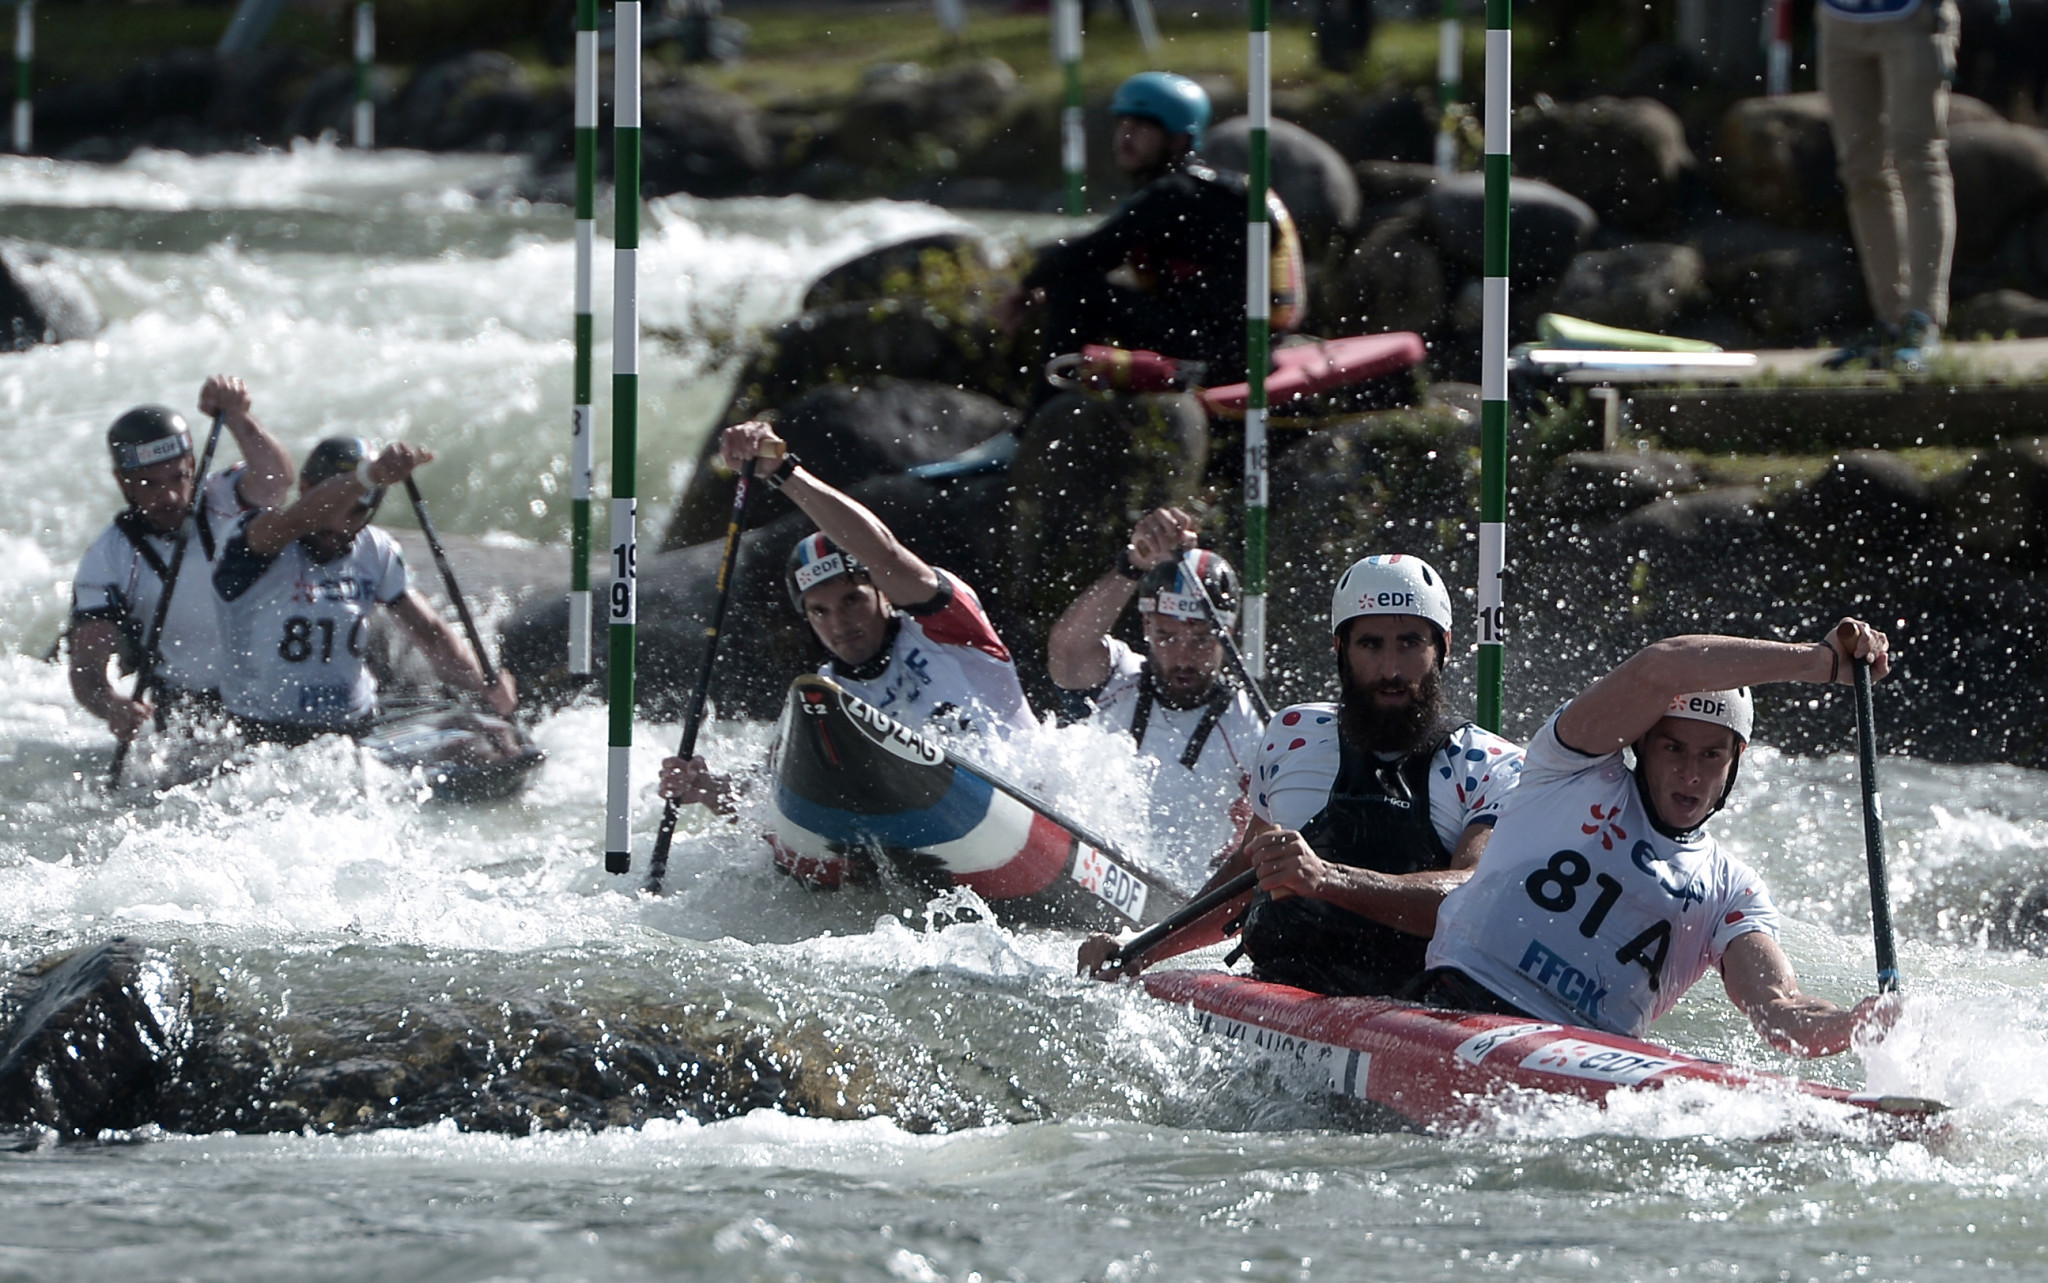 Top-level wildwater canoeing to return with European Championships in Spain